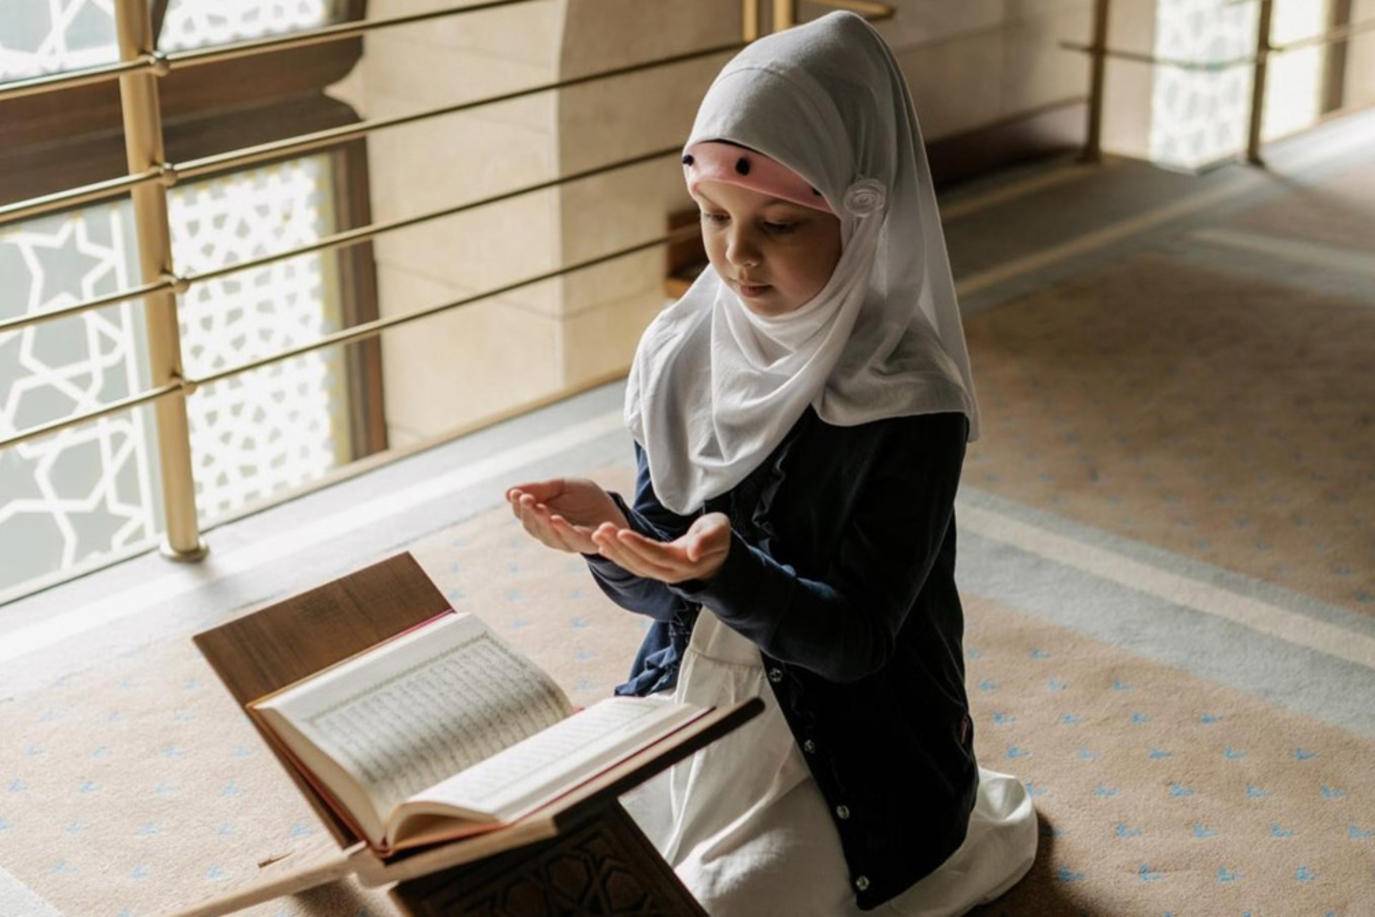 Can I am  Learn Quran Classes for Adults in UK